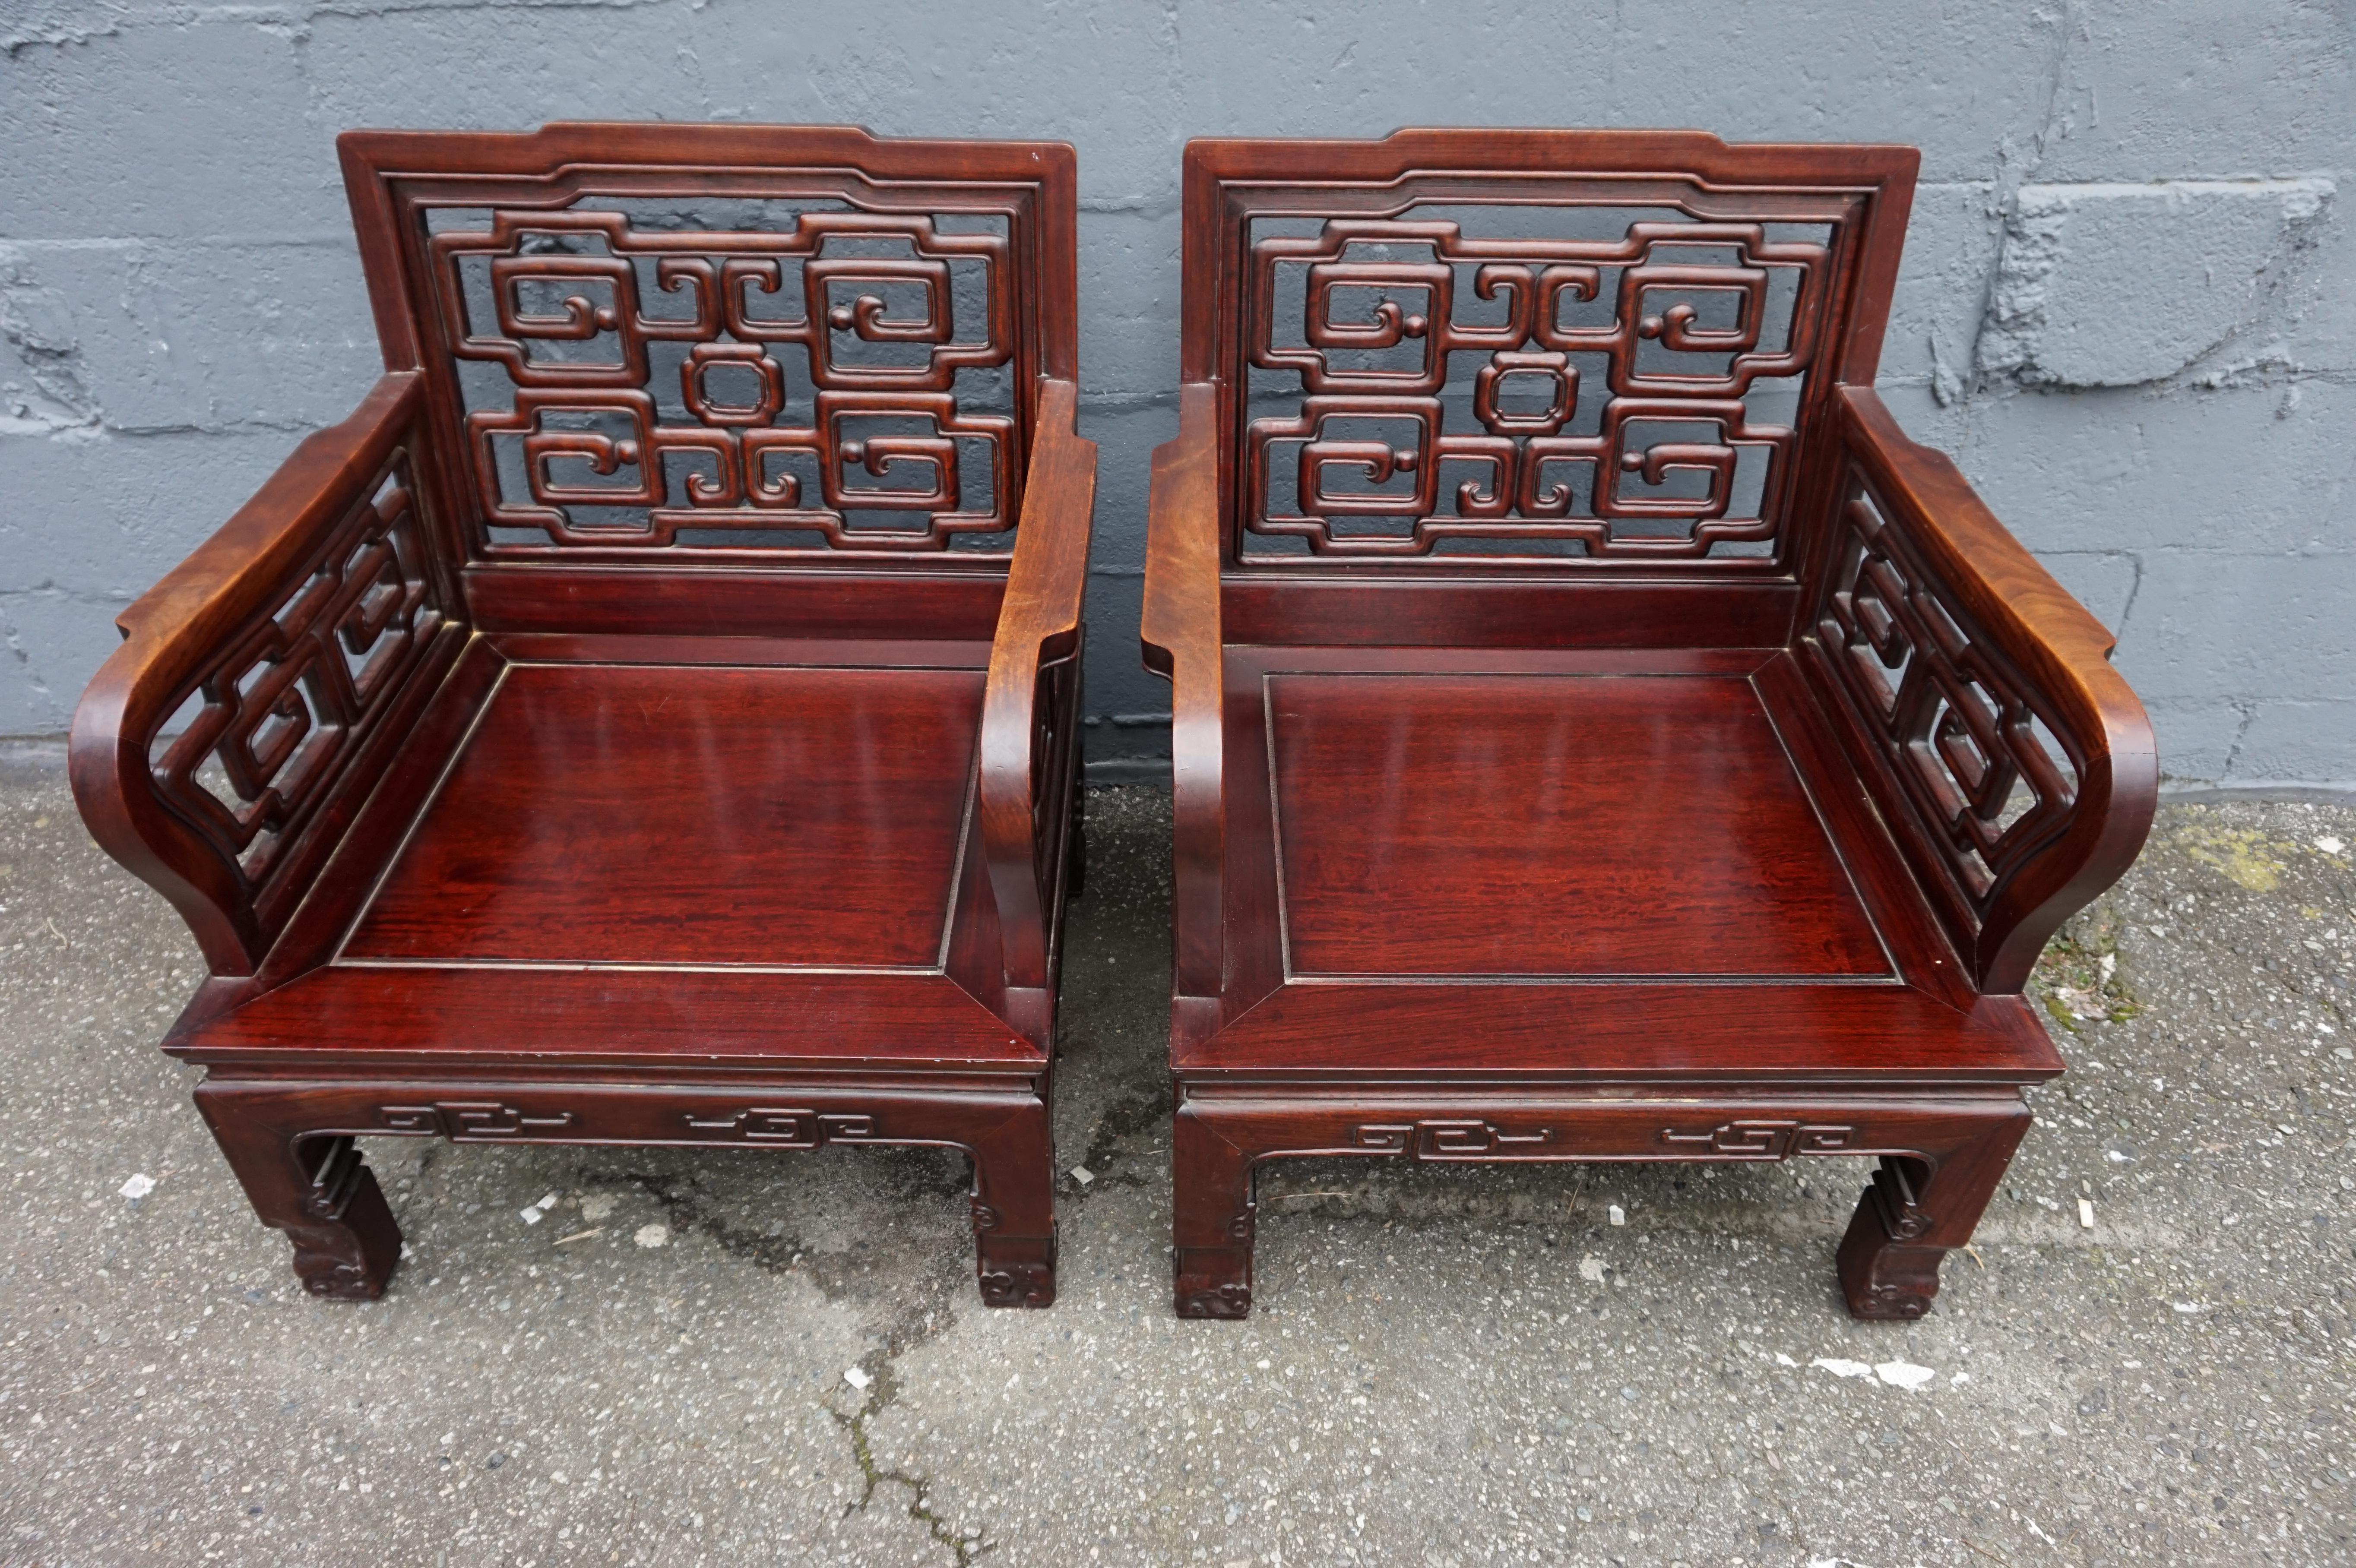 Beautifully hand-carved and well proportioned Chinese solid Rosewood export chairs. Sturdy with refined carving and broad armrests. In good original condition. Ideal for a space that requires a touch of Asian flair or simply seating that exudes